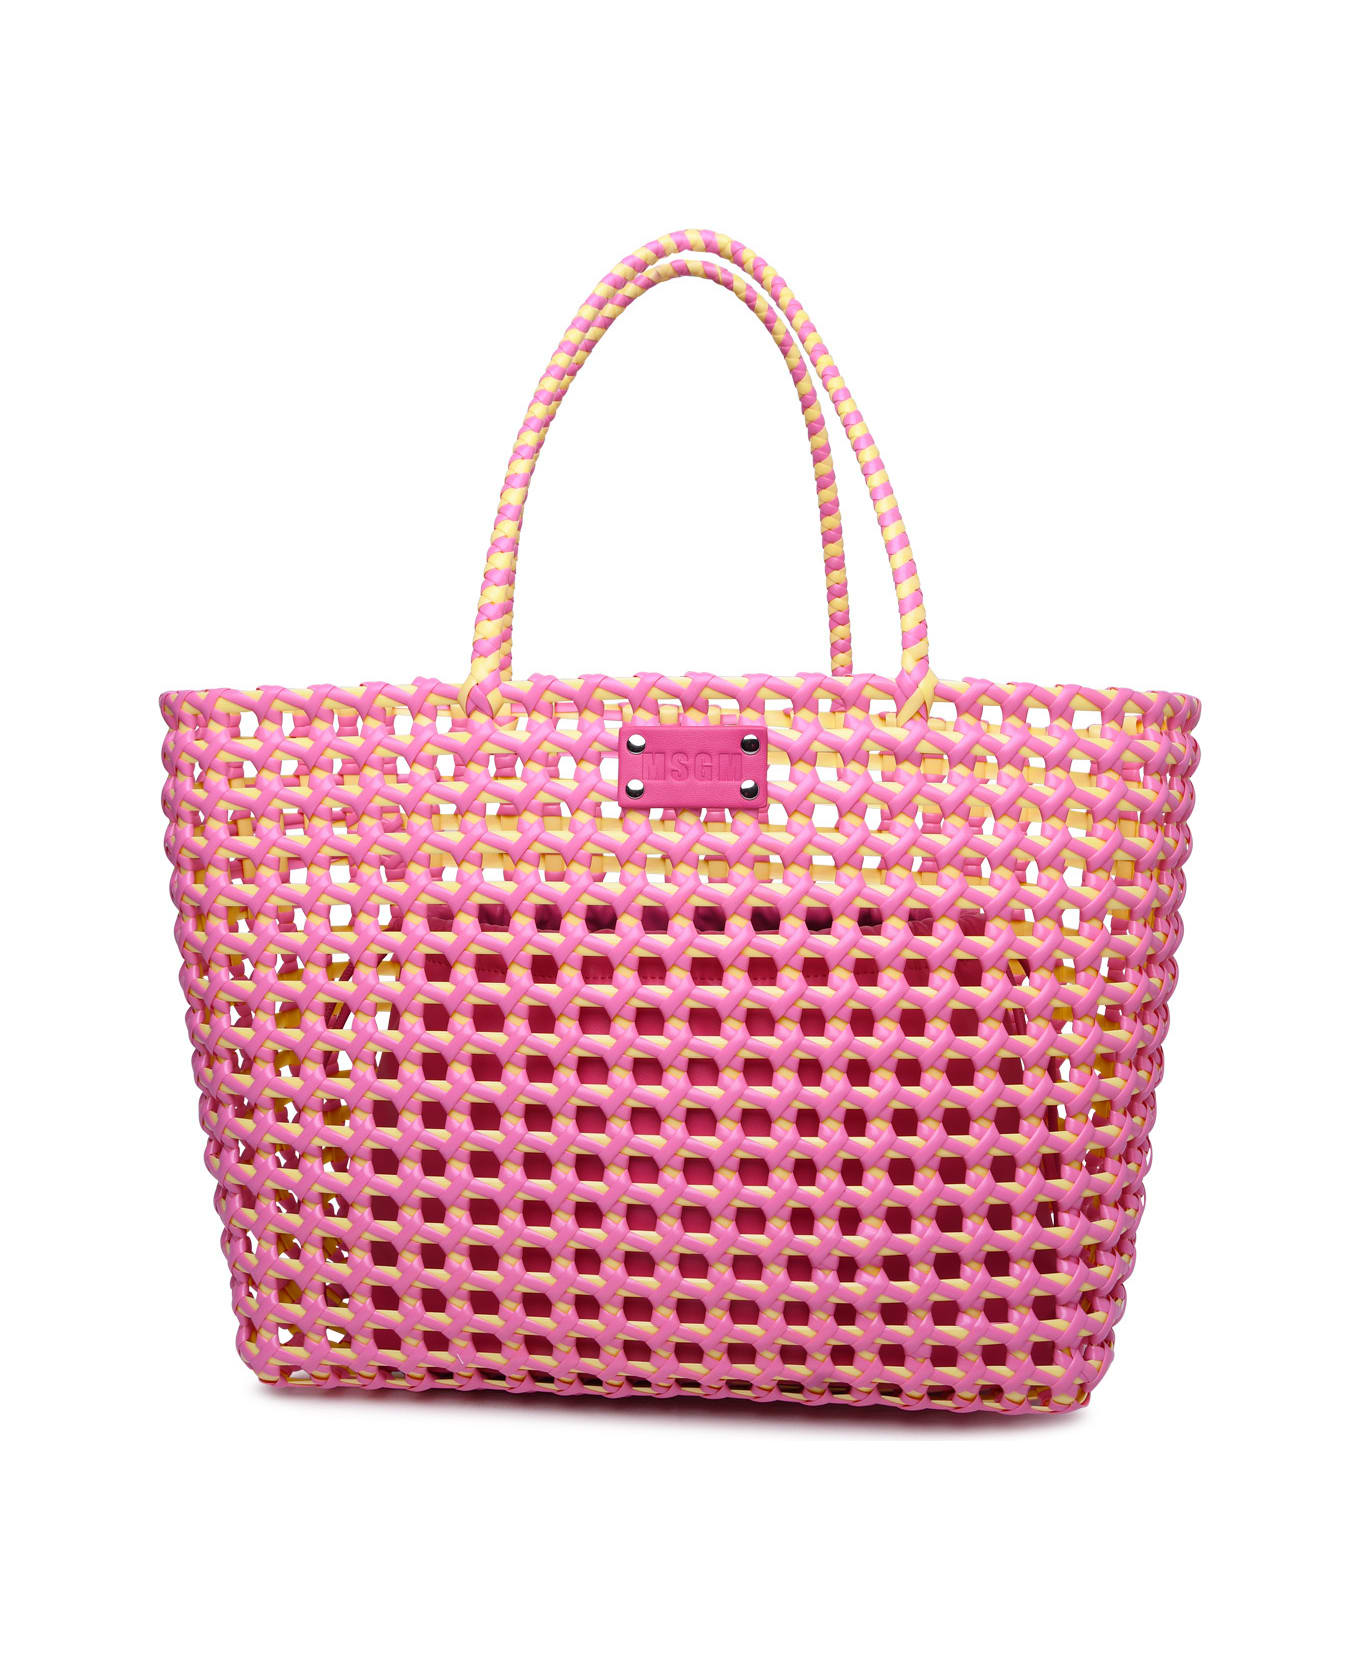 MSGM Large Bag In Two-tone Polyethylene Blend - Pink